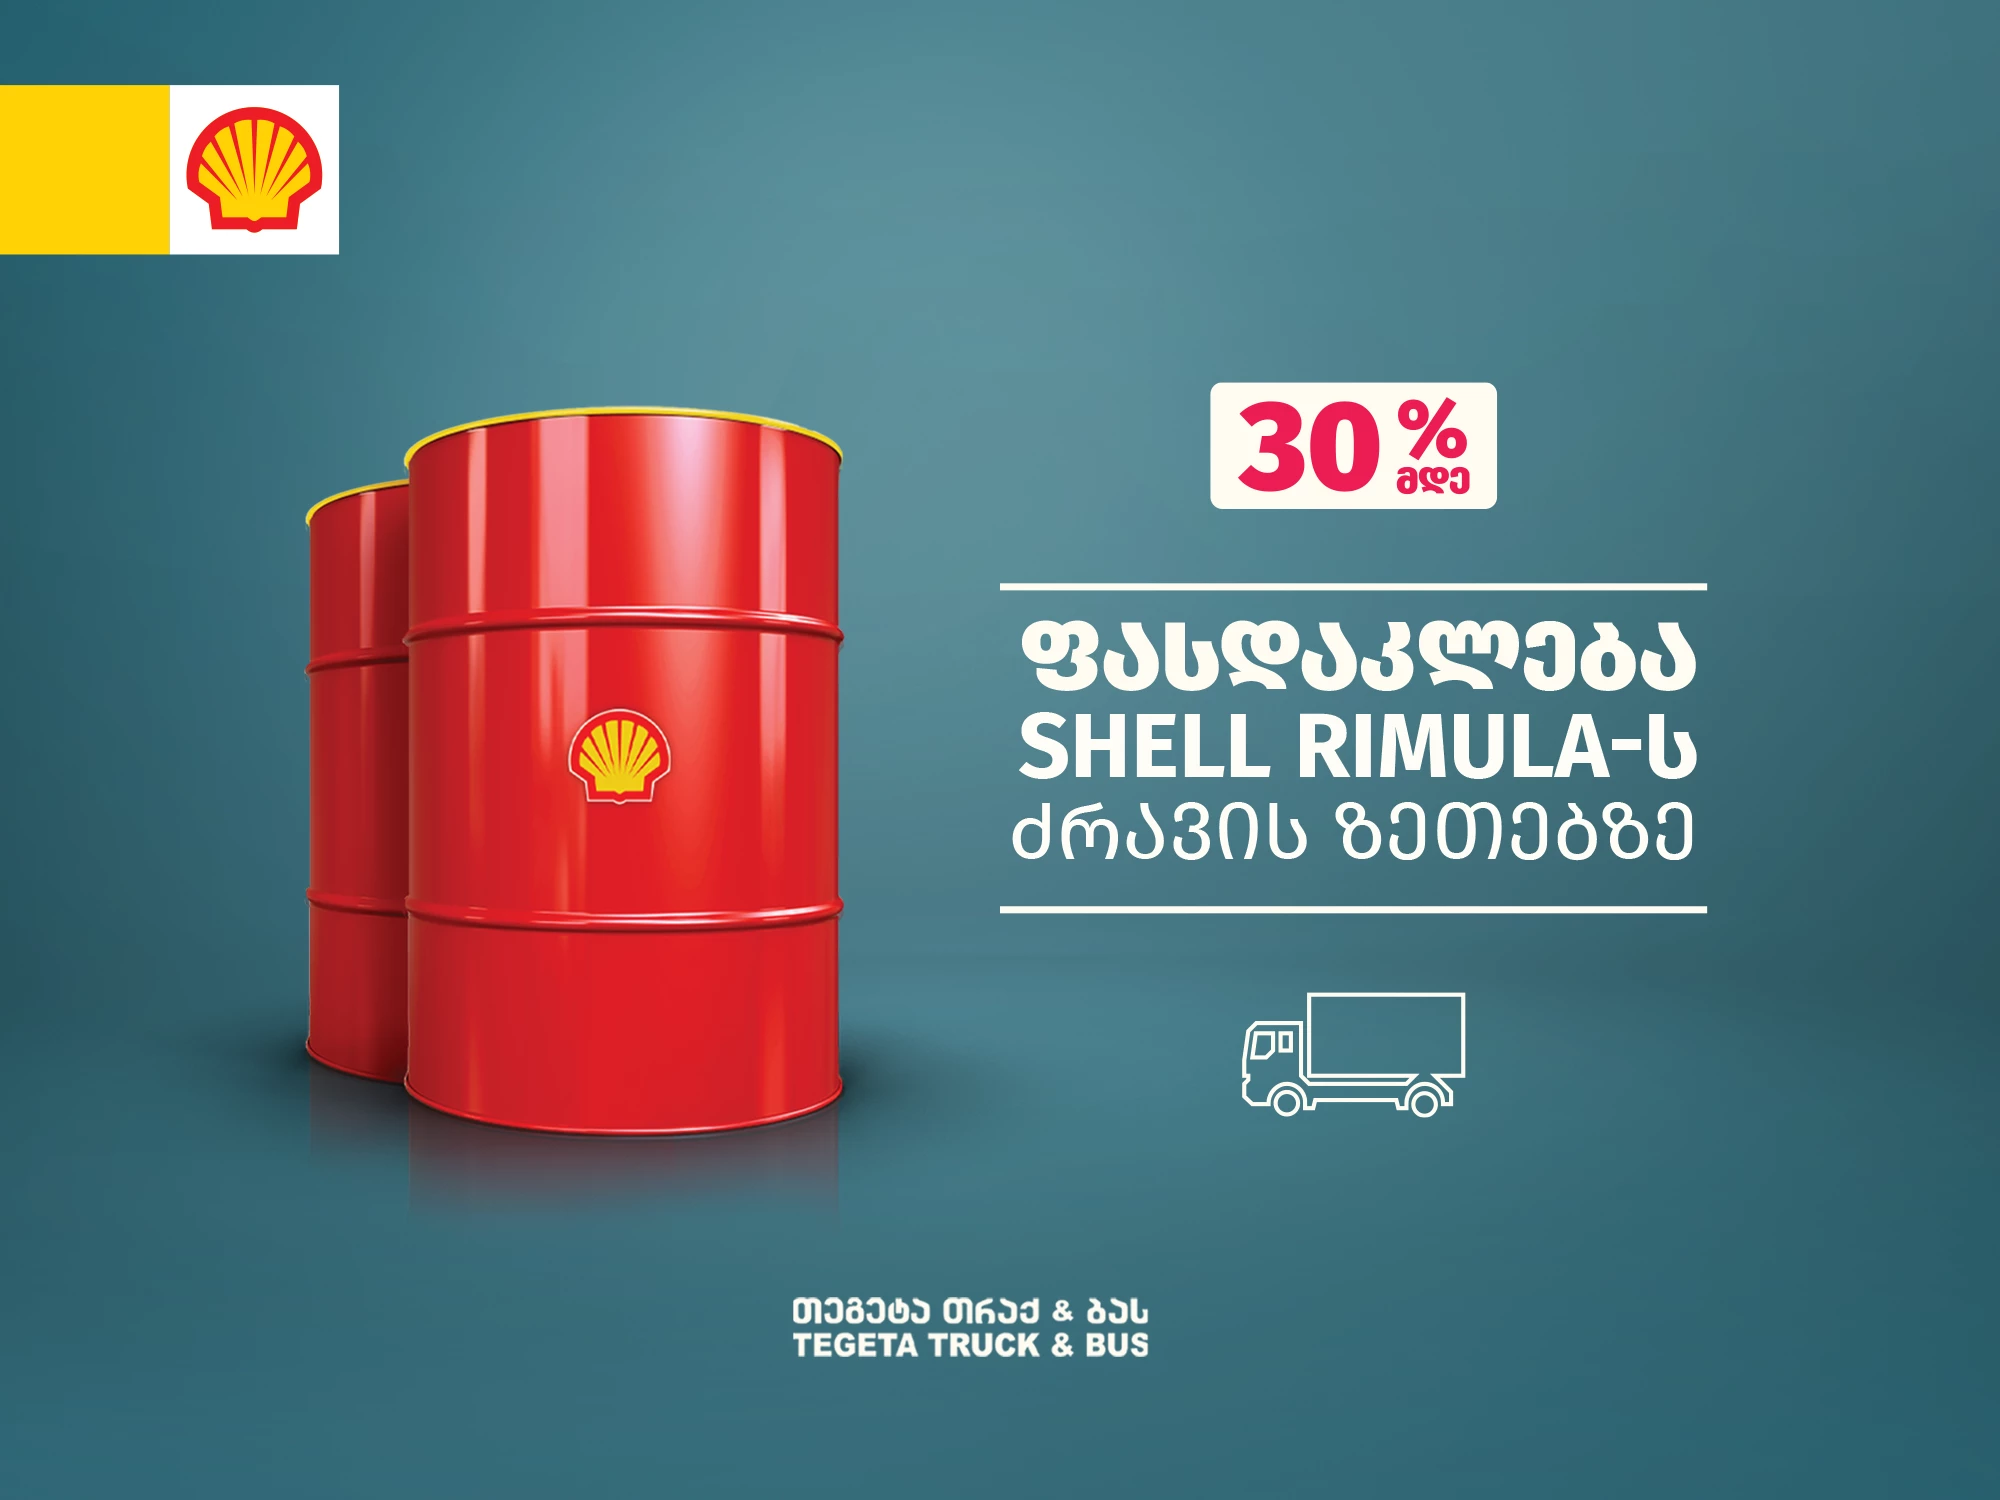 UP TO 30 % DISCOUNT OFF ON SHELL RIMULA ENGINE OIL FOR COMMERCIAL MOTOR VEHICLES! Offer Image